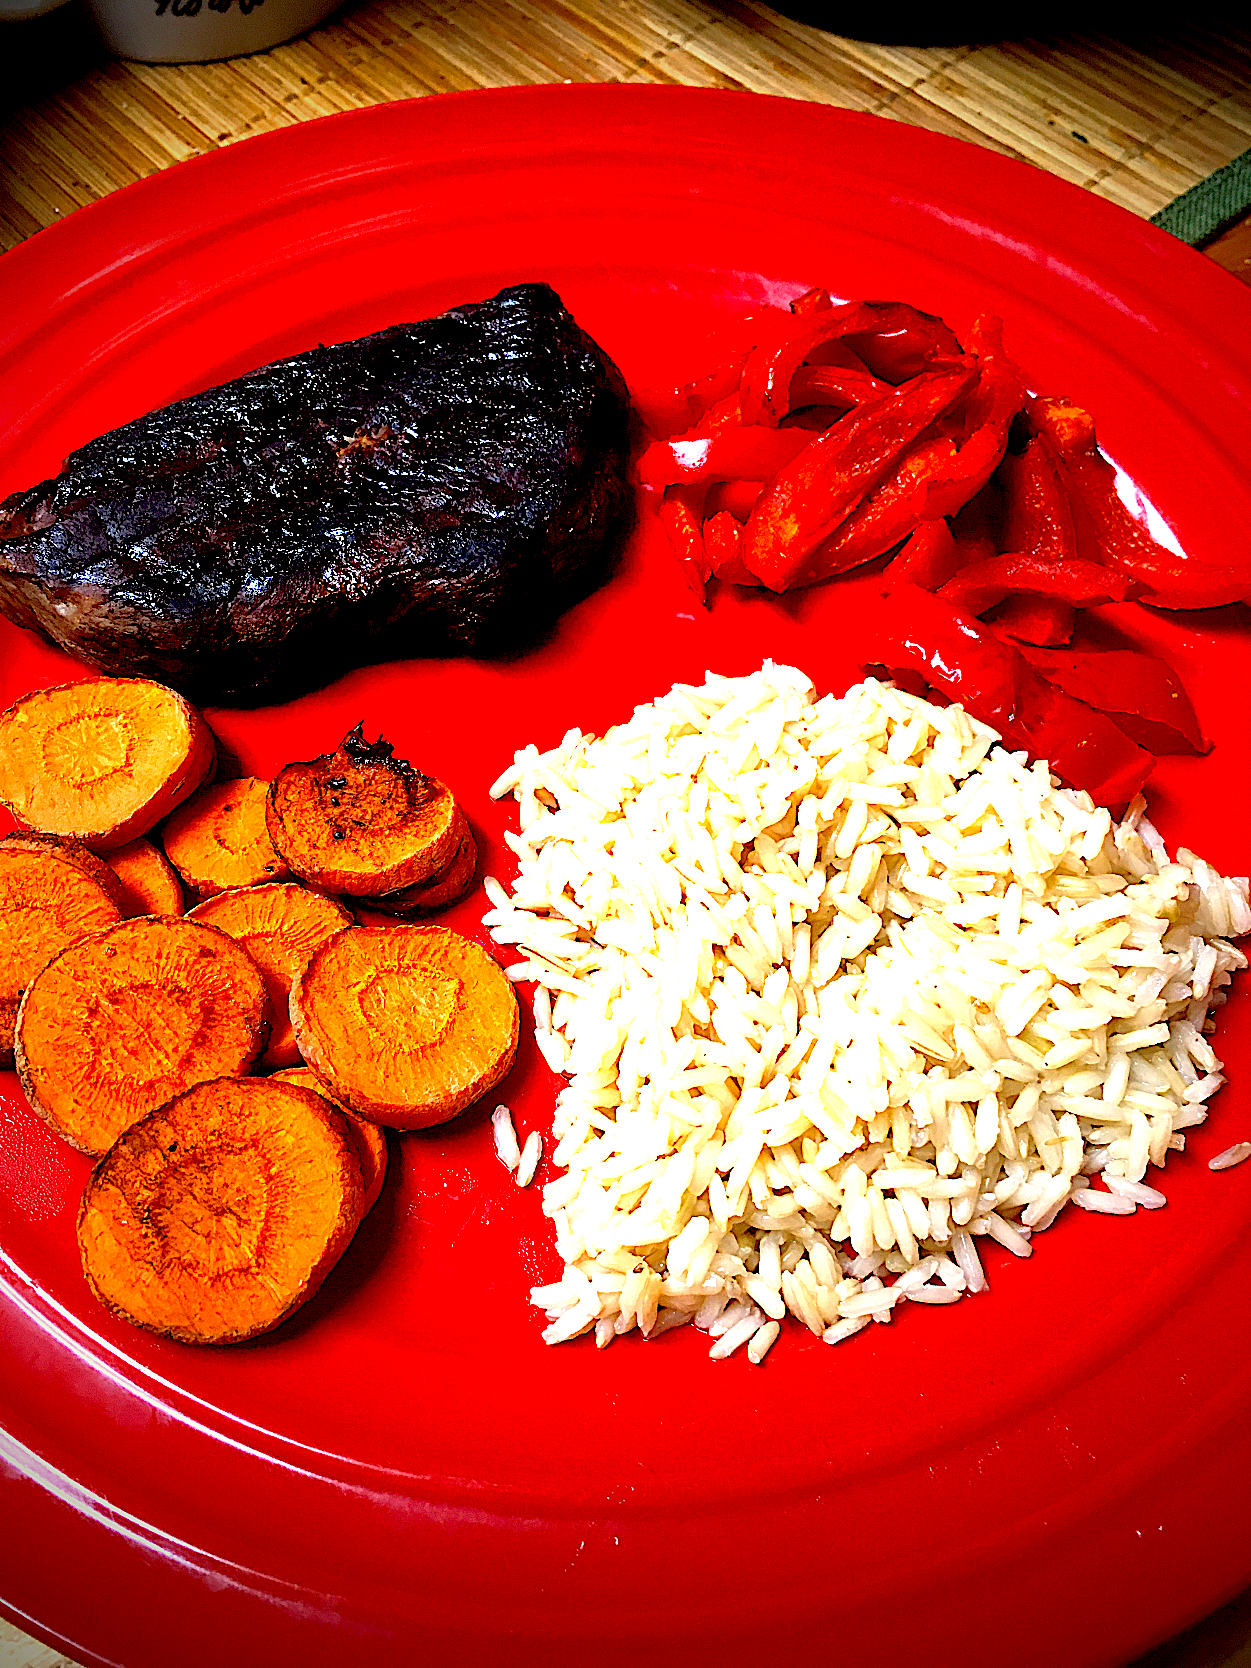 Grilled Petite Sirloin, Carrots and Red Pepper W/Brown Rice